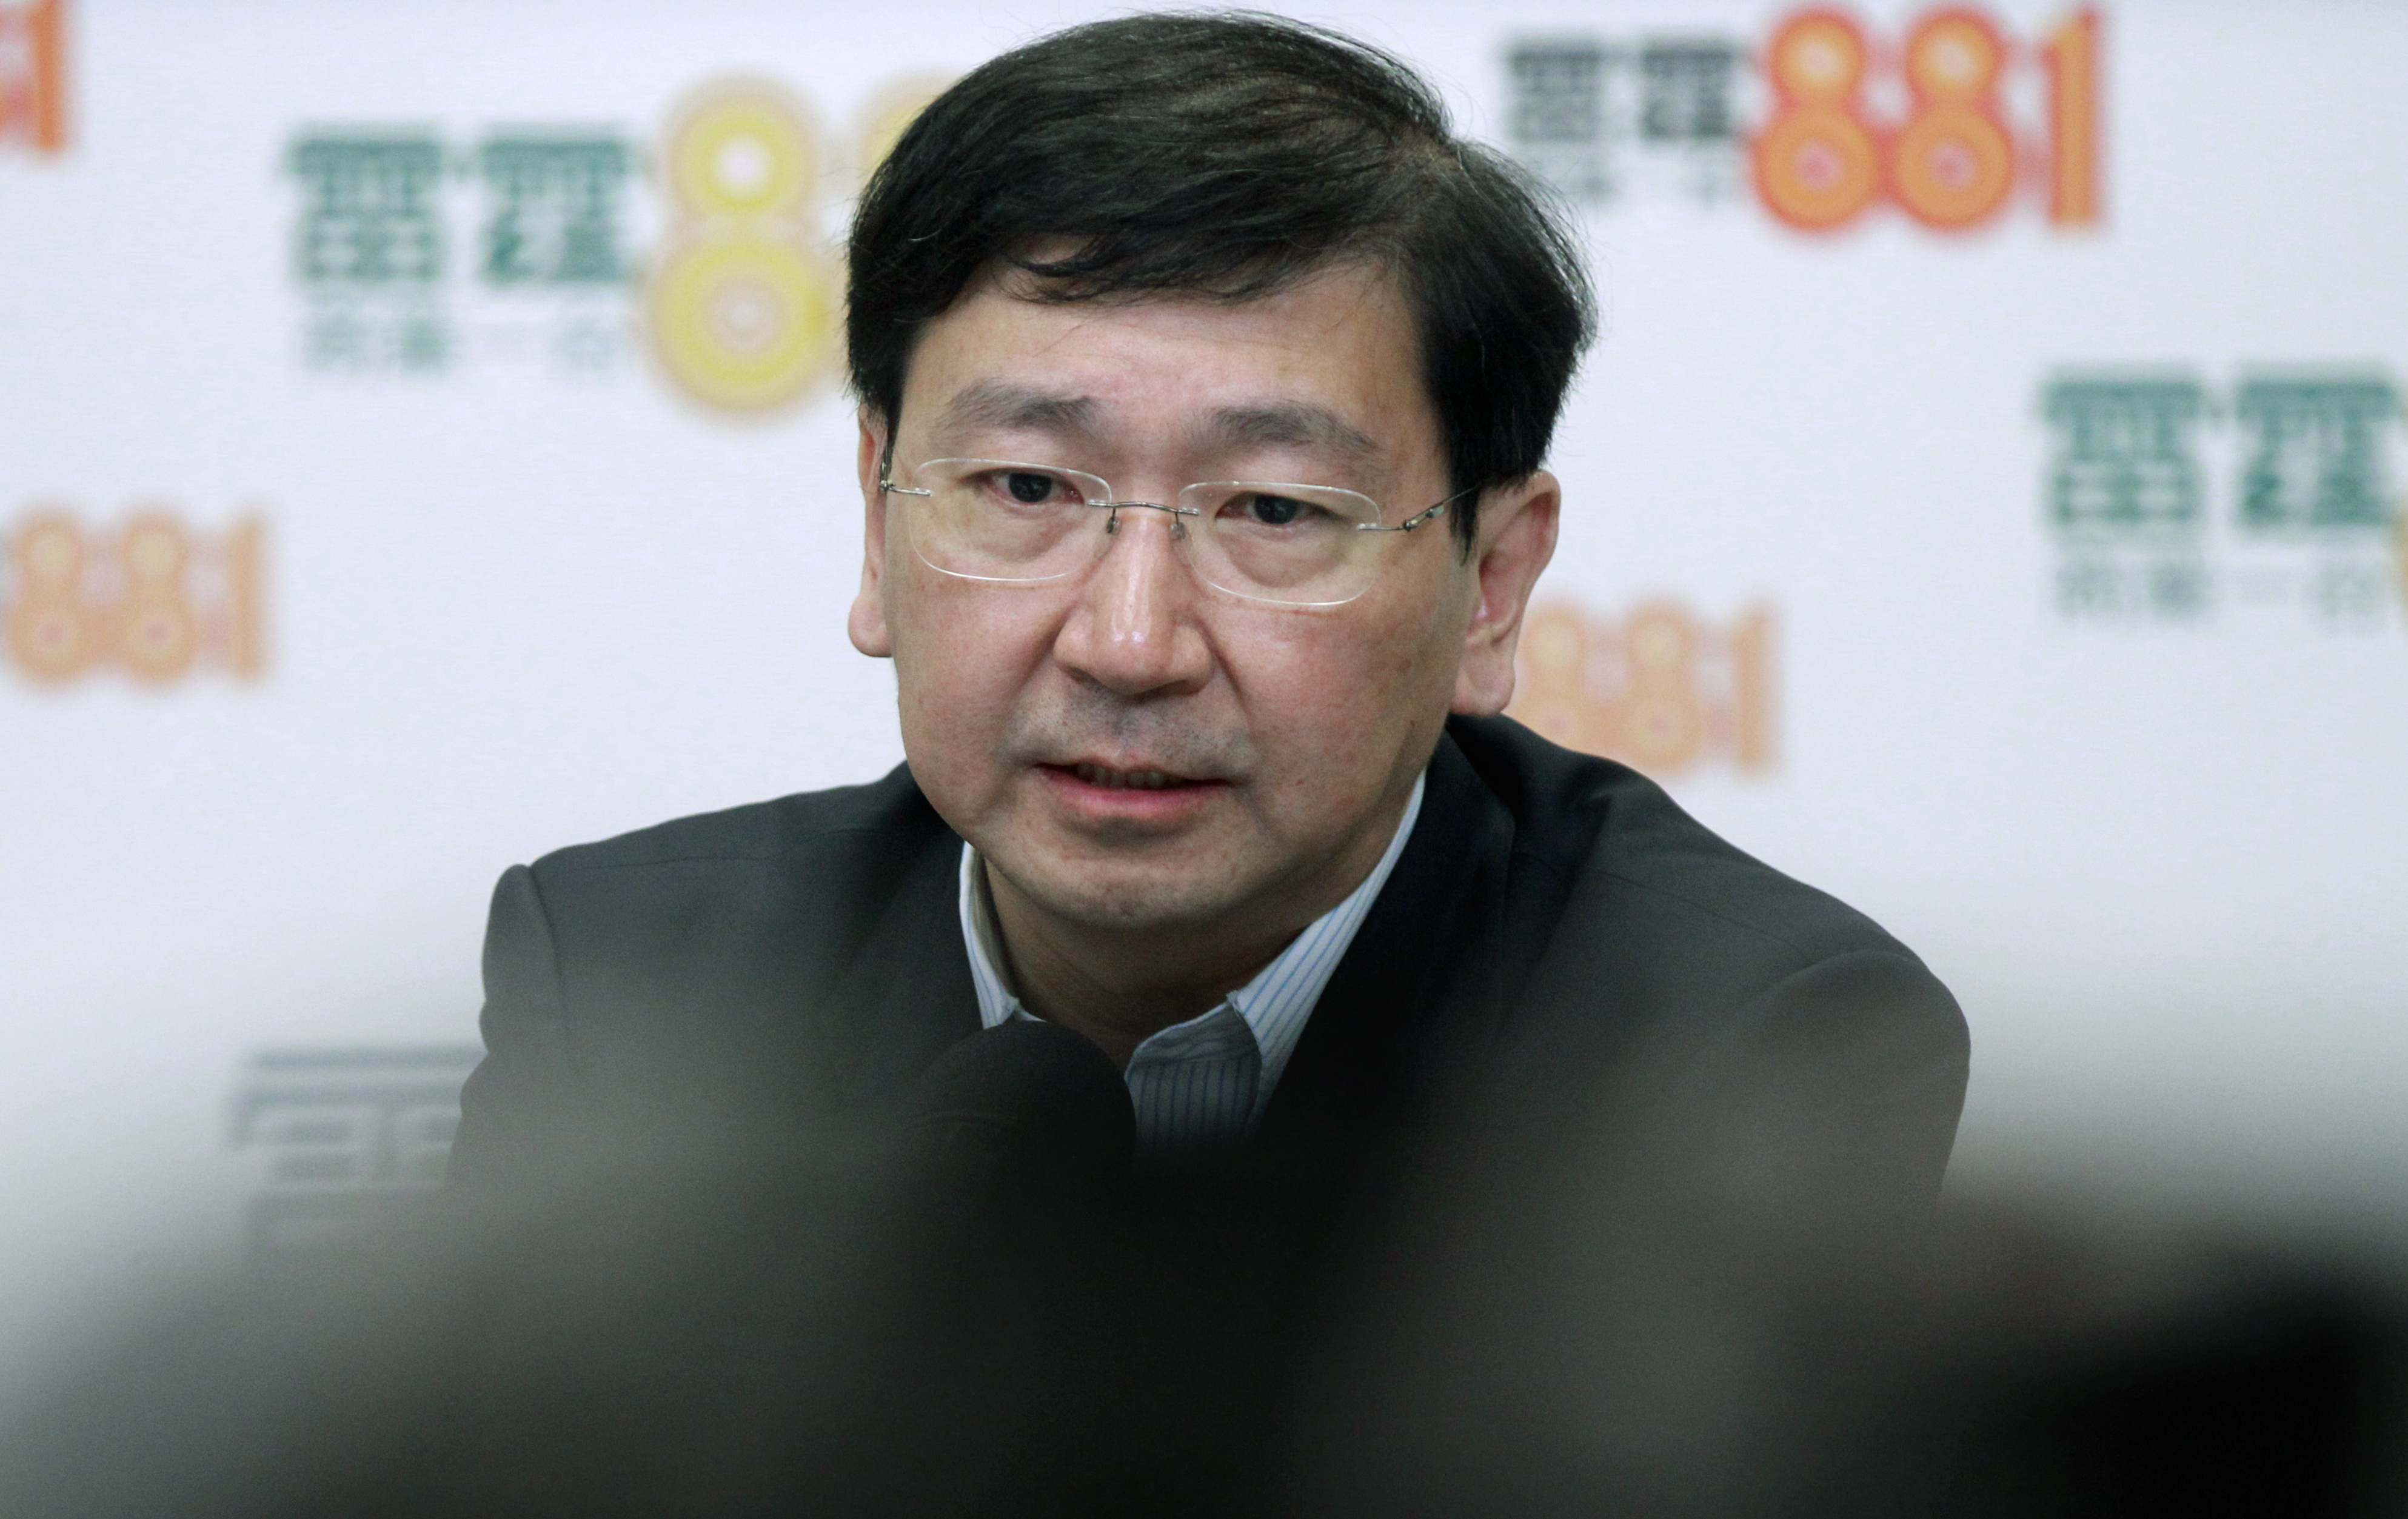 Johannes Chan suggested that pro-Beijing forces were trying to sabotage his appointment out of a desire to curb academic freedom. Photo: Edward Wong